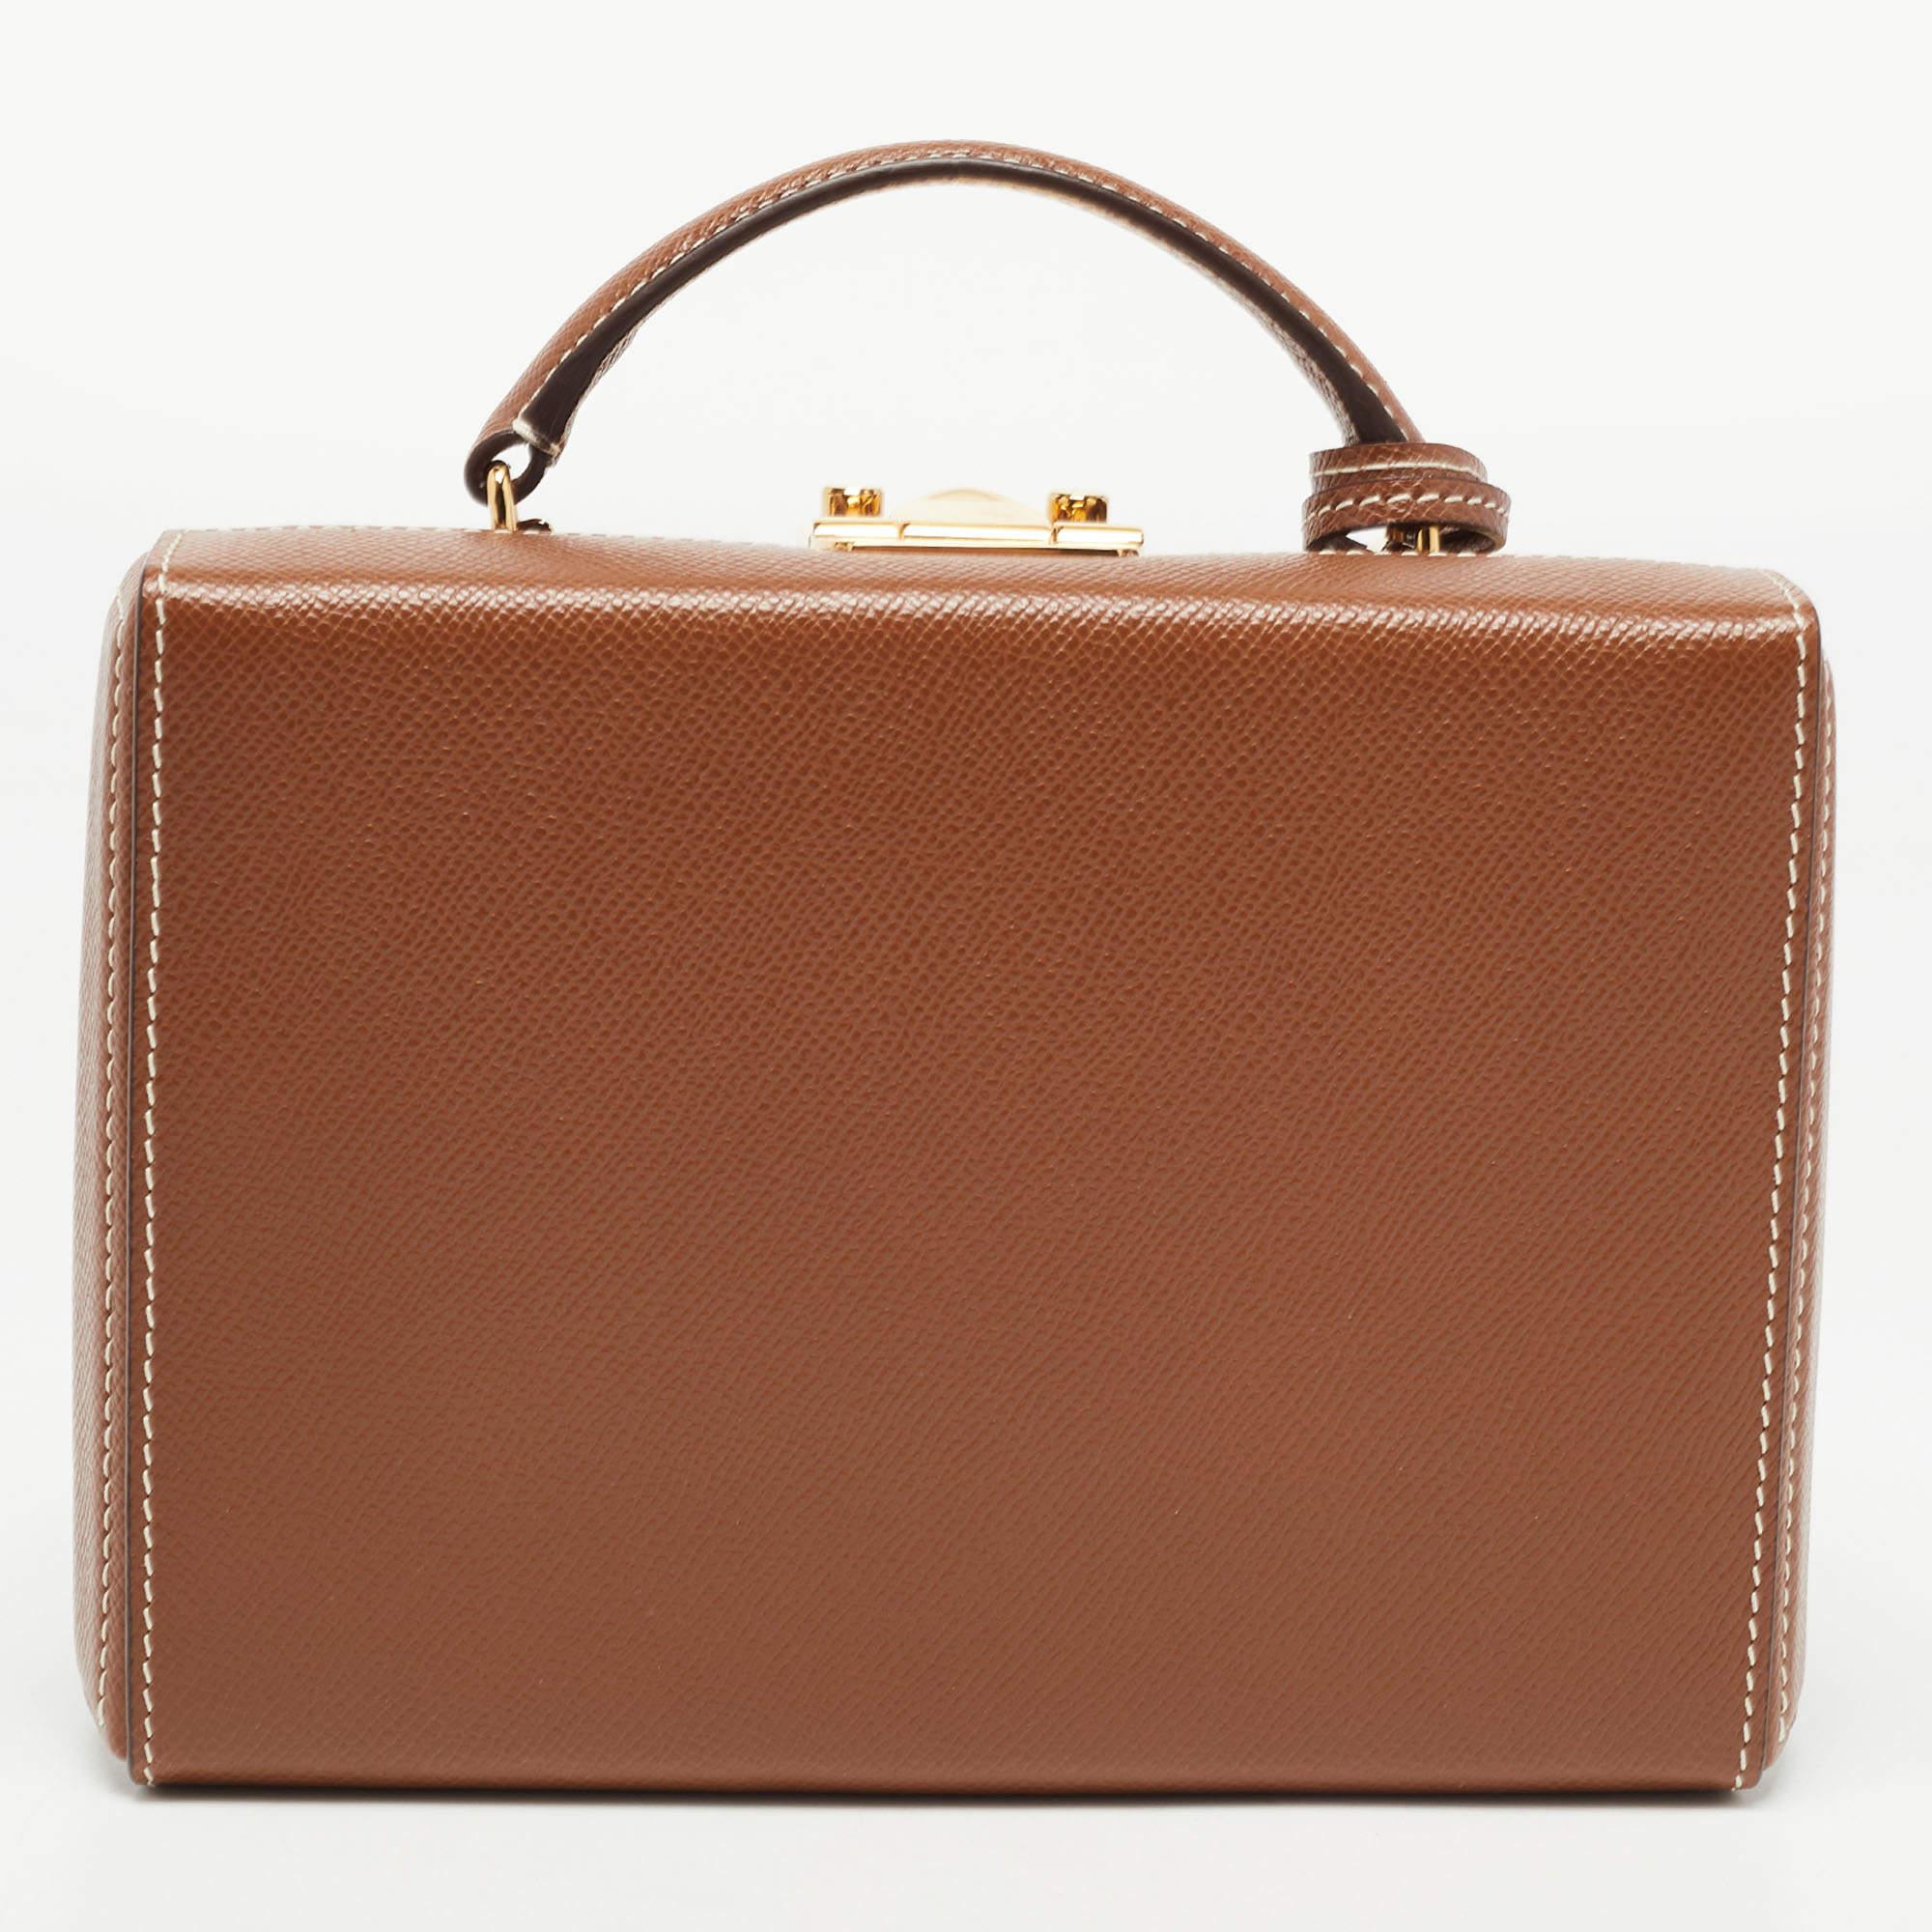 This Mark Cross Grace Box bag showcases the label's classy design attributes. It is made from leather in a classy shade and added with a shapely top handle and a detachable strap.

Includes: Key, Detachable Strap
